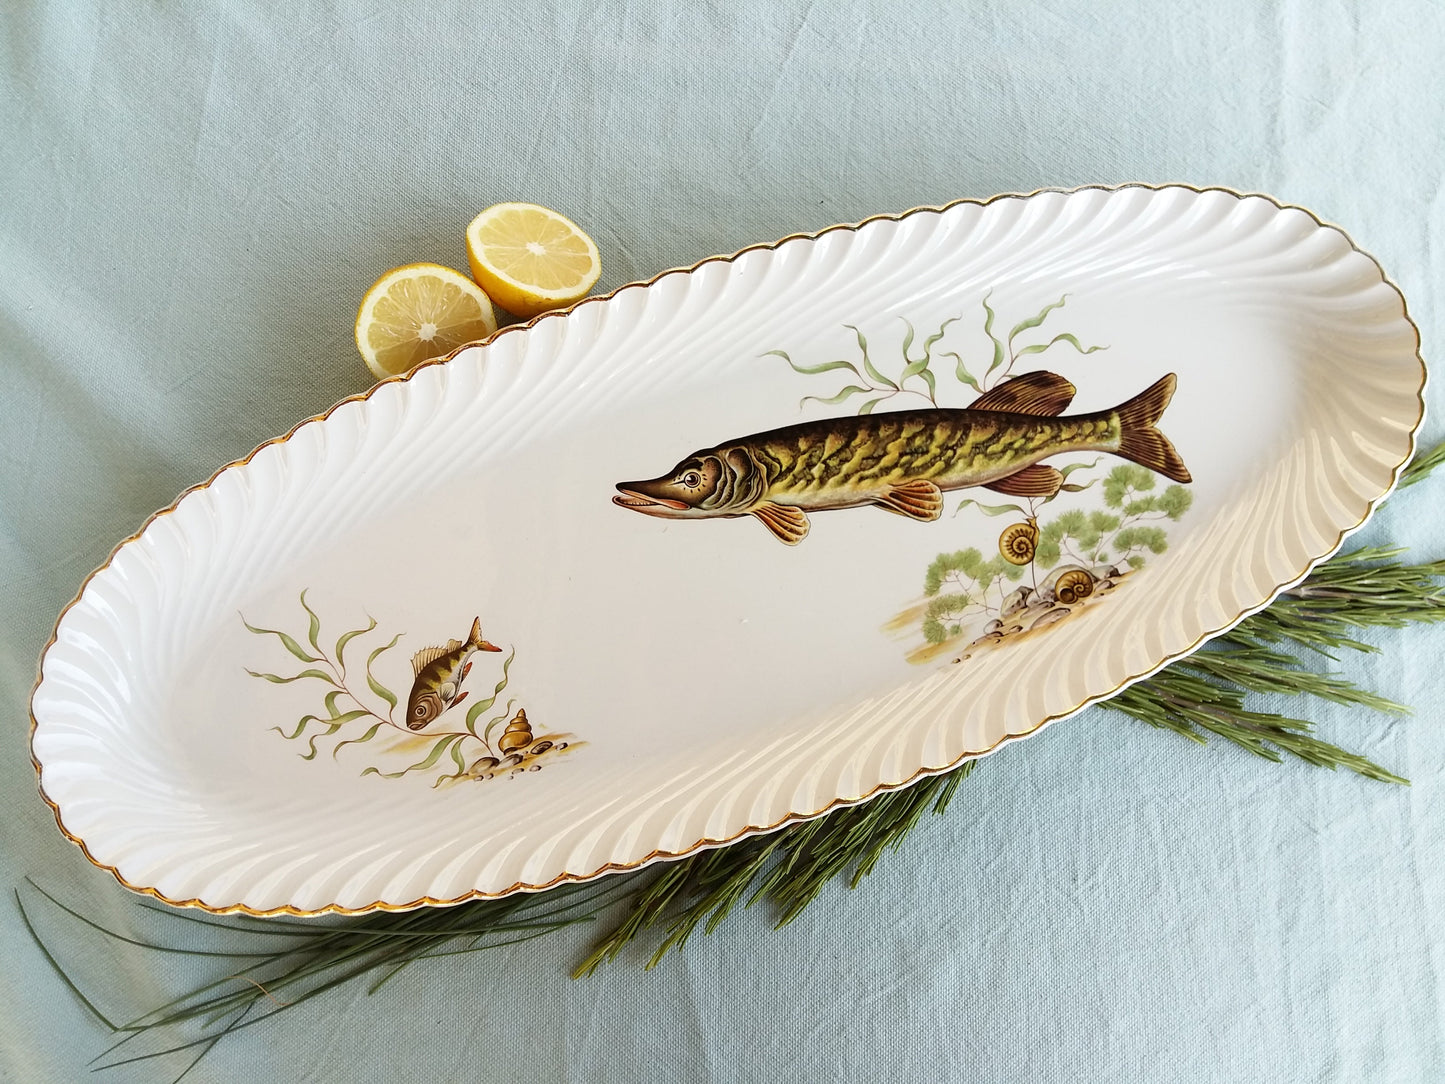 Extra Long, French, Porcelain, "Lunéville" Fish Platter With Gilded Trim. from Tiggy & Pip - €160.00! Shop now at Tiggy and Pip